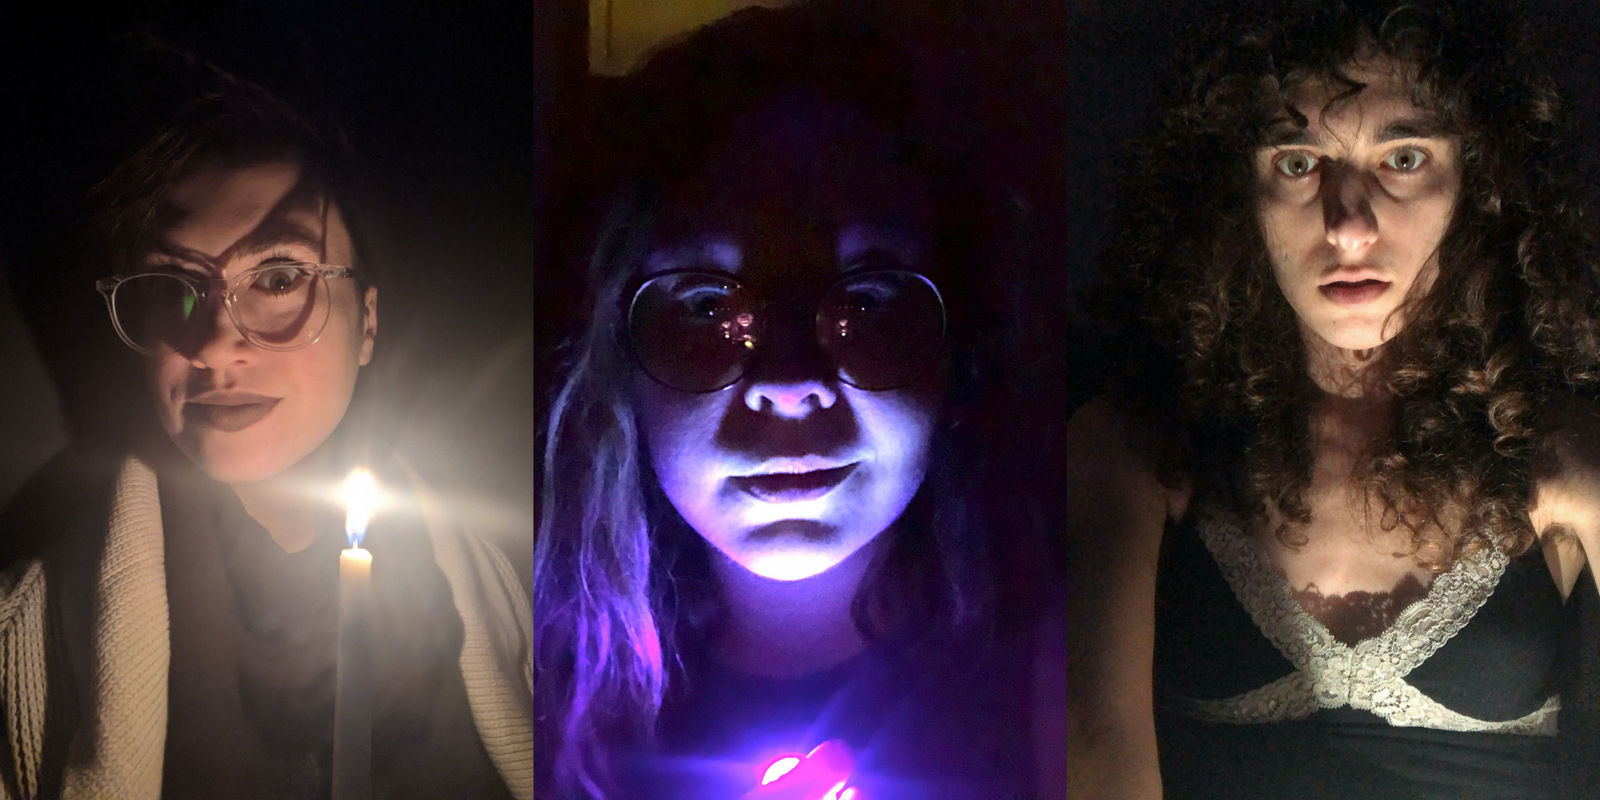 Feature image showing Nicole, Rachel, and Drew with lights under their chins. Spooky!